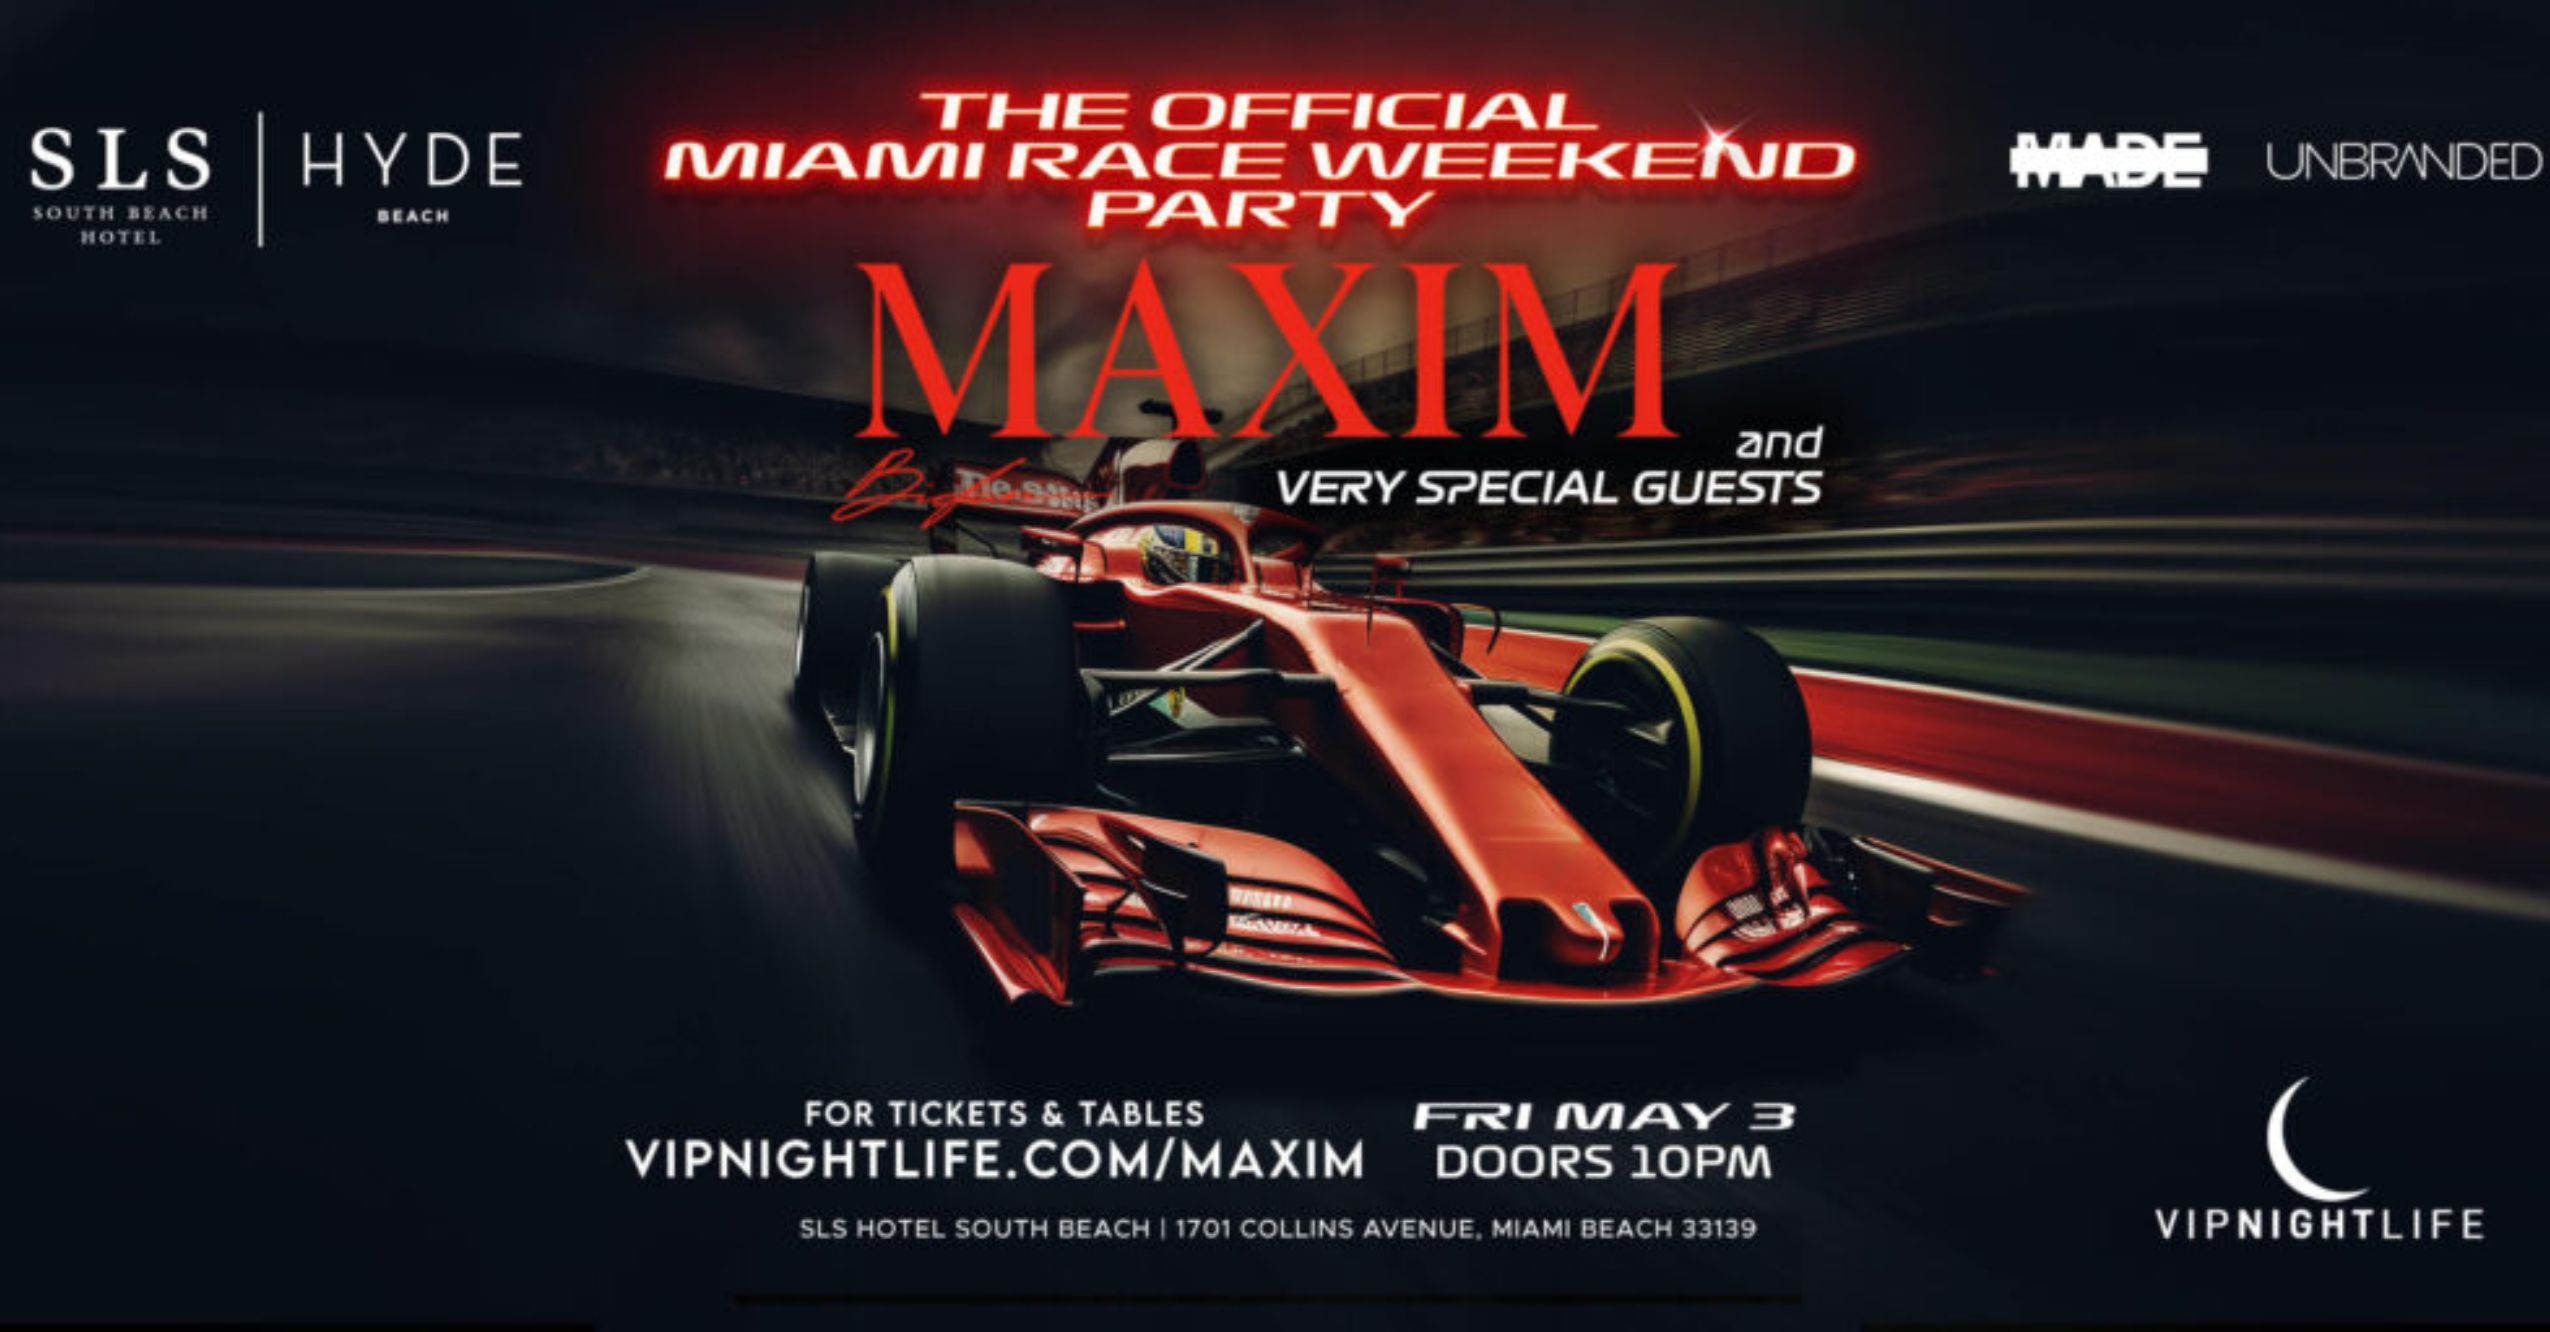 How To Get Tickets For Maxim’s Official Miami Race Weekend Party